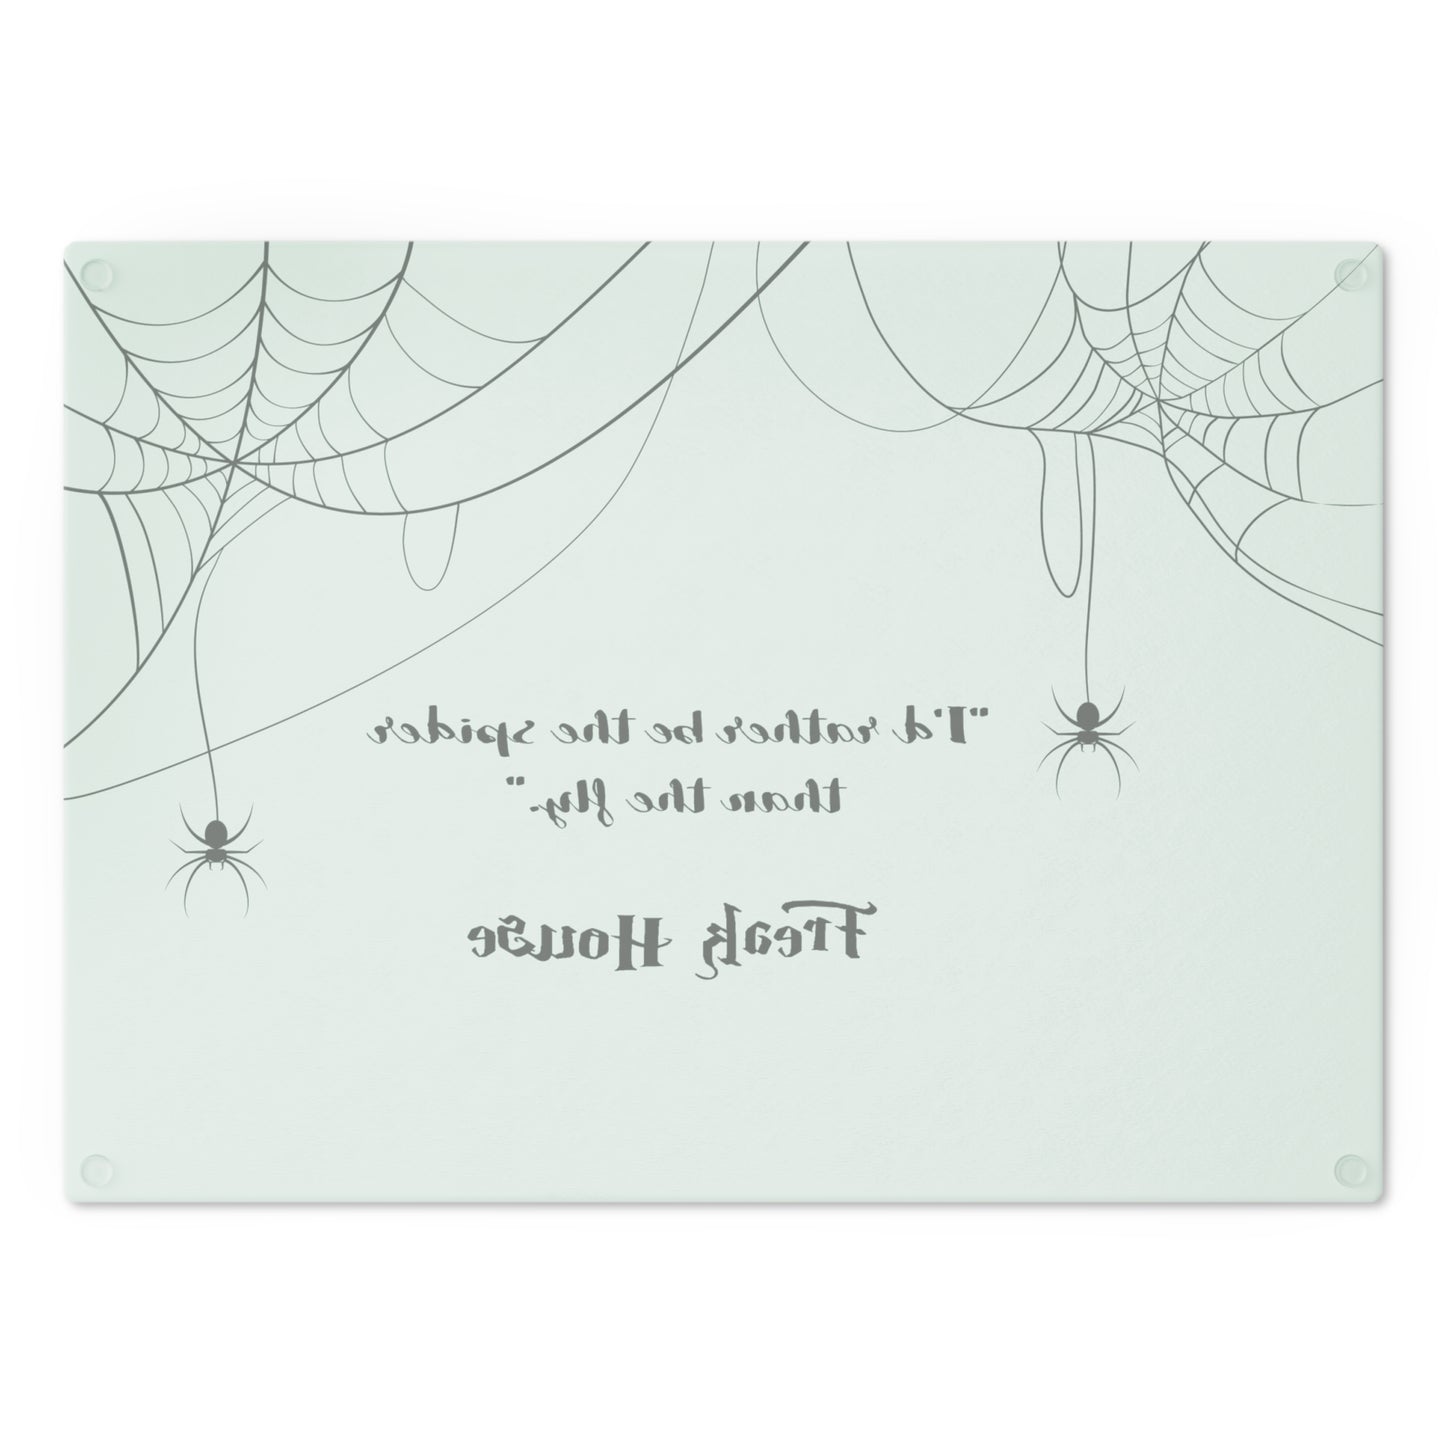 Freak House "I'd Rather be the Spider" Cutting Board, Spider Web Pattern, Black on Mint Green Glass